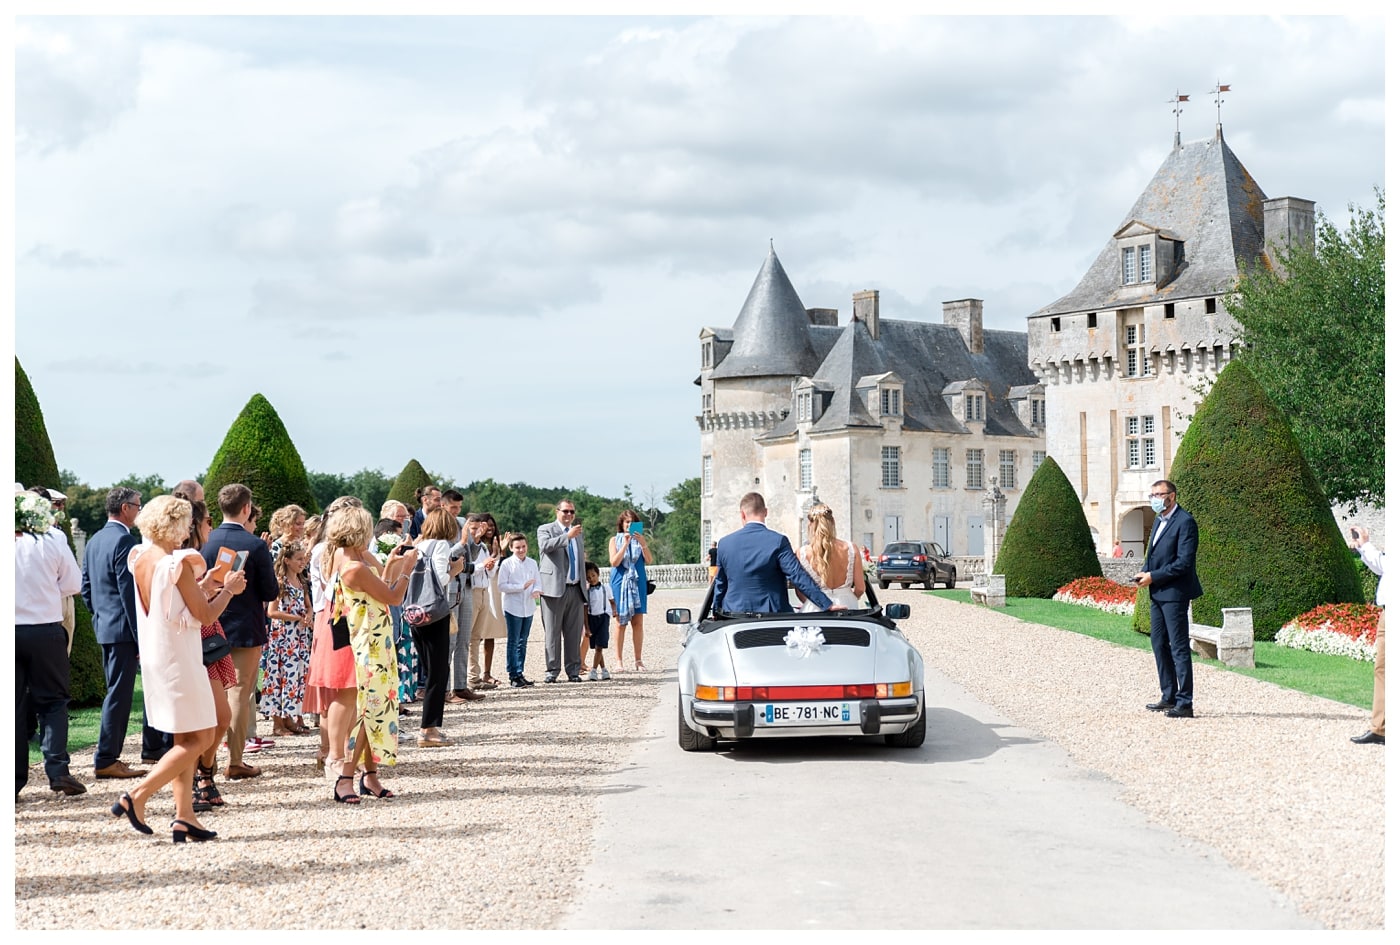 5. Château Trioulou: Perfect for Family Gatherings or Weddings